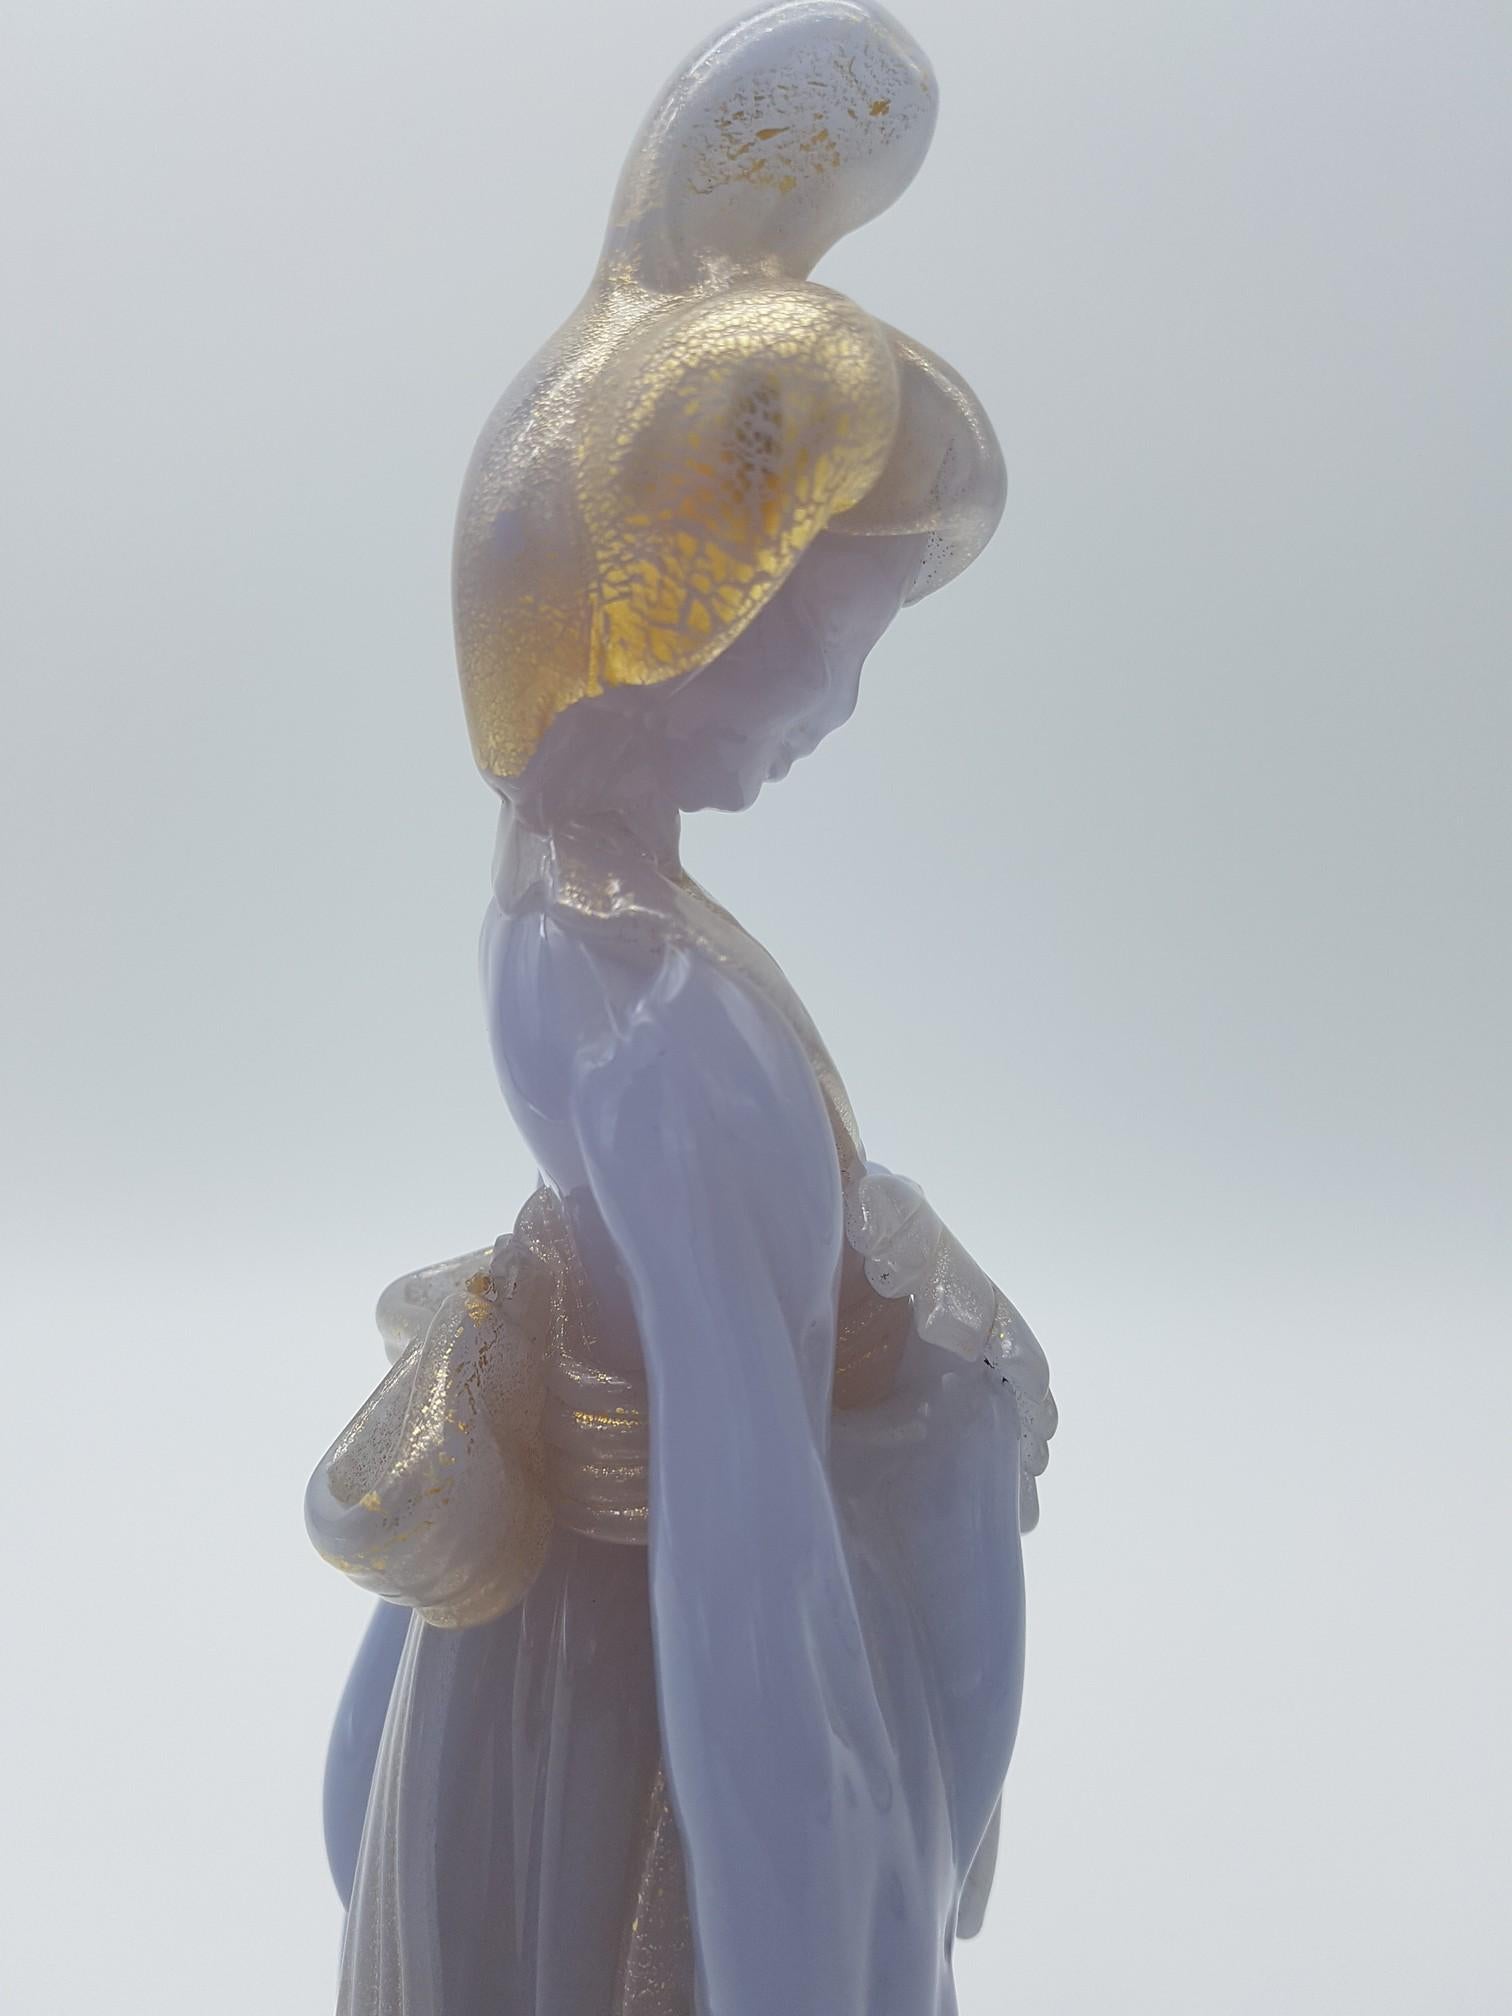 Vintage Murano Glass Geisha Figurine by Ermanno Nason at Cenedese, Late 1960s For Sale 2